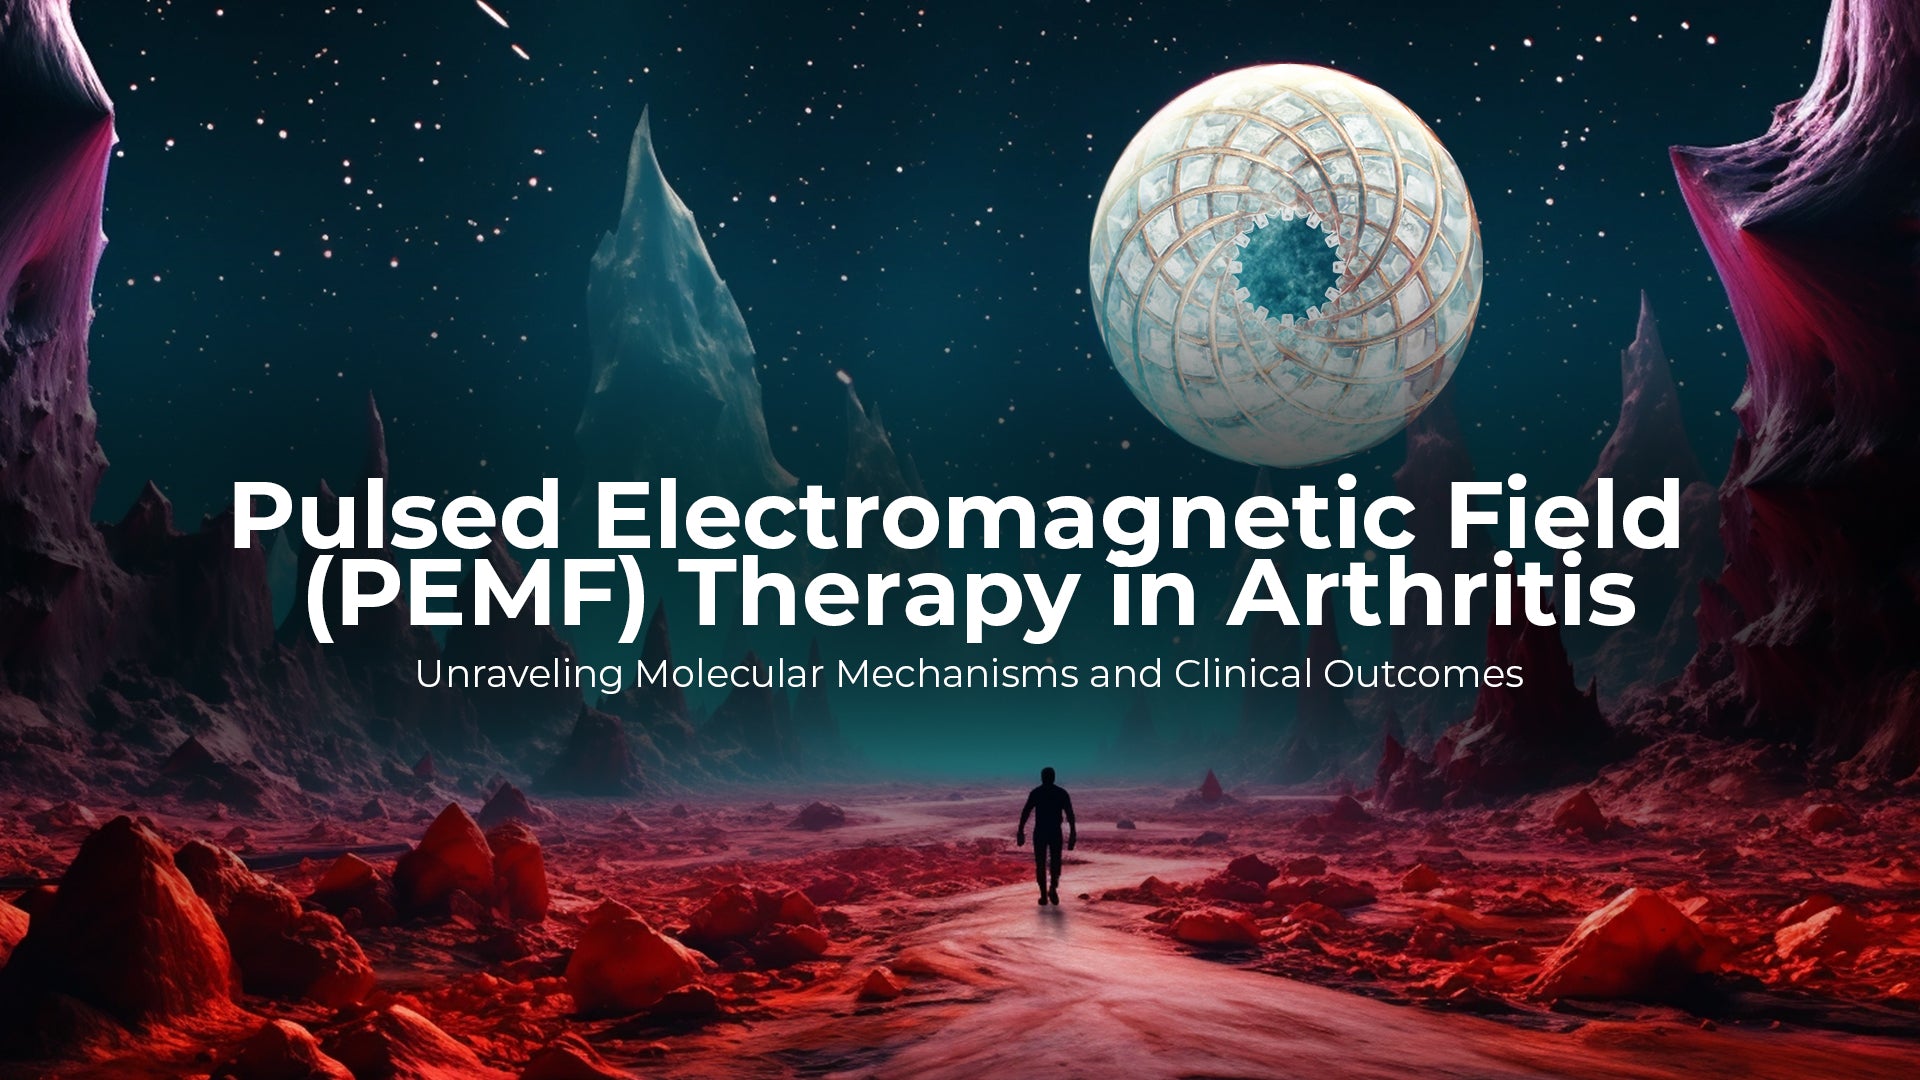 Pulsed Electromagnetic Field (PEMF) Therapy in Arthritis: Unraveling Molecular Mechanisms and Clinical Outcomes